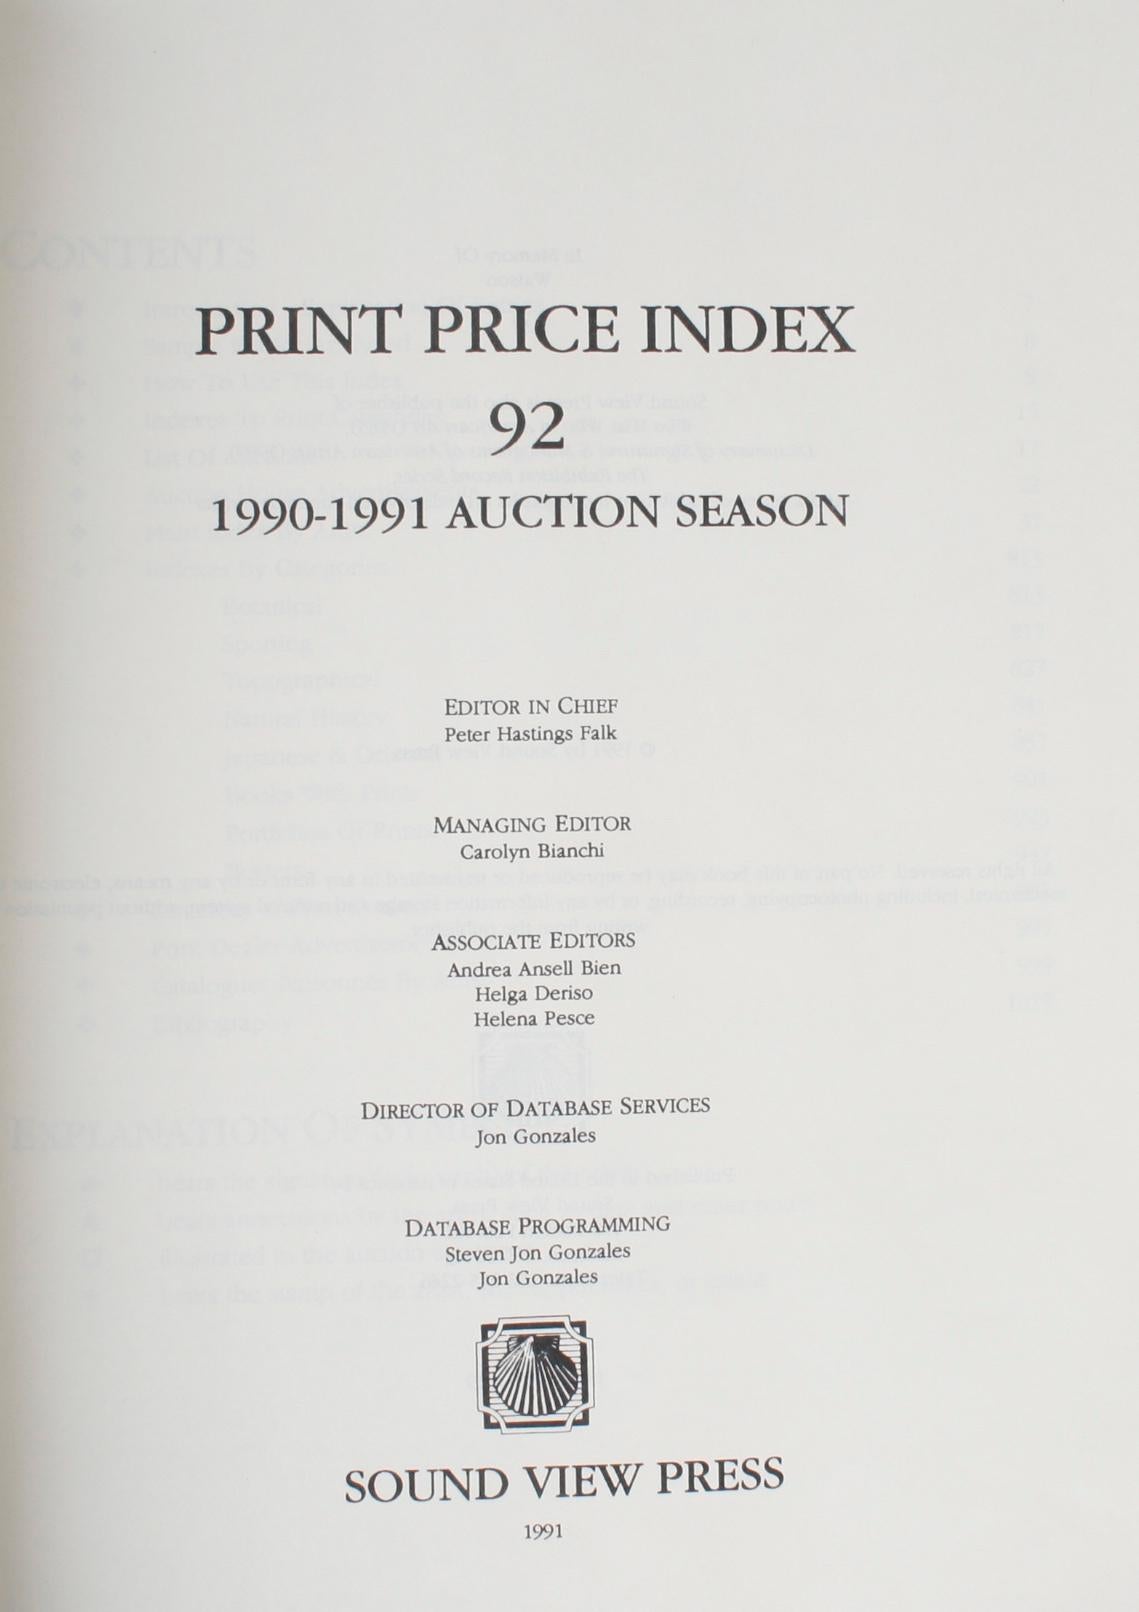 Print price index 92: 1990-1991 auction season by Peter Falk. Sound view press, Ct., 1991. Hardcover no dust cover. 1,024pp. In addition to art prints there are special sections on: Botanical, sporting, topographical, natural history and Japanese